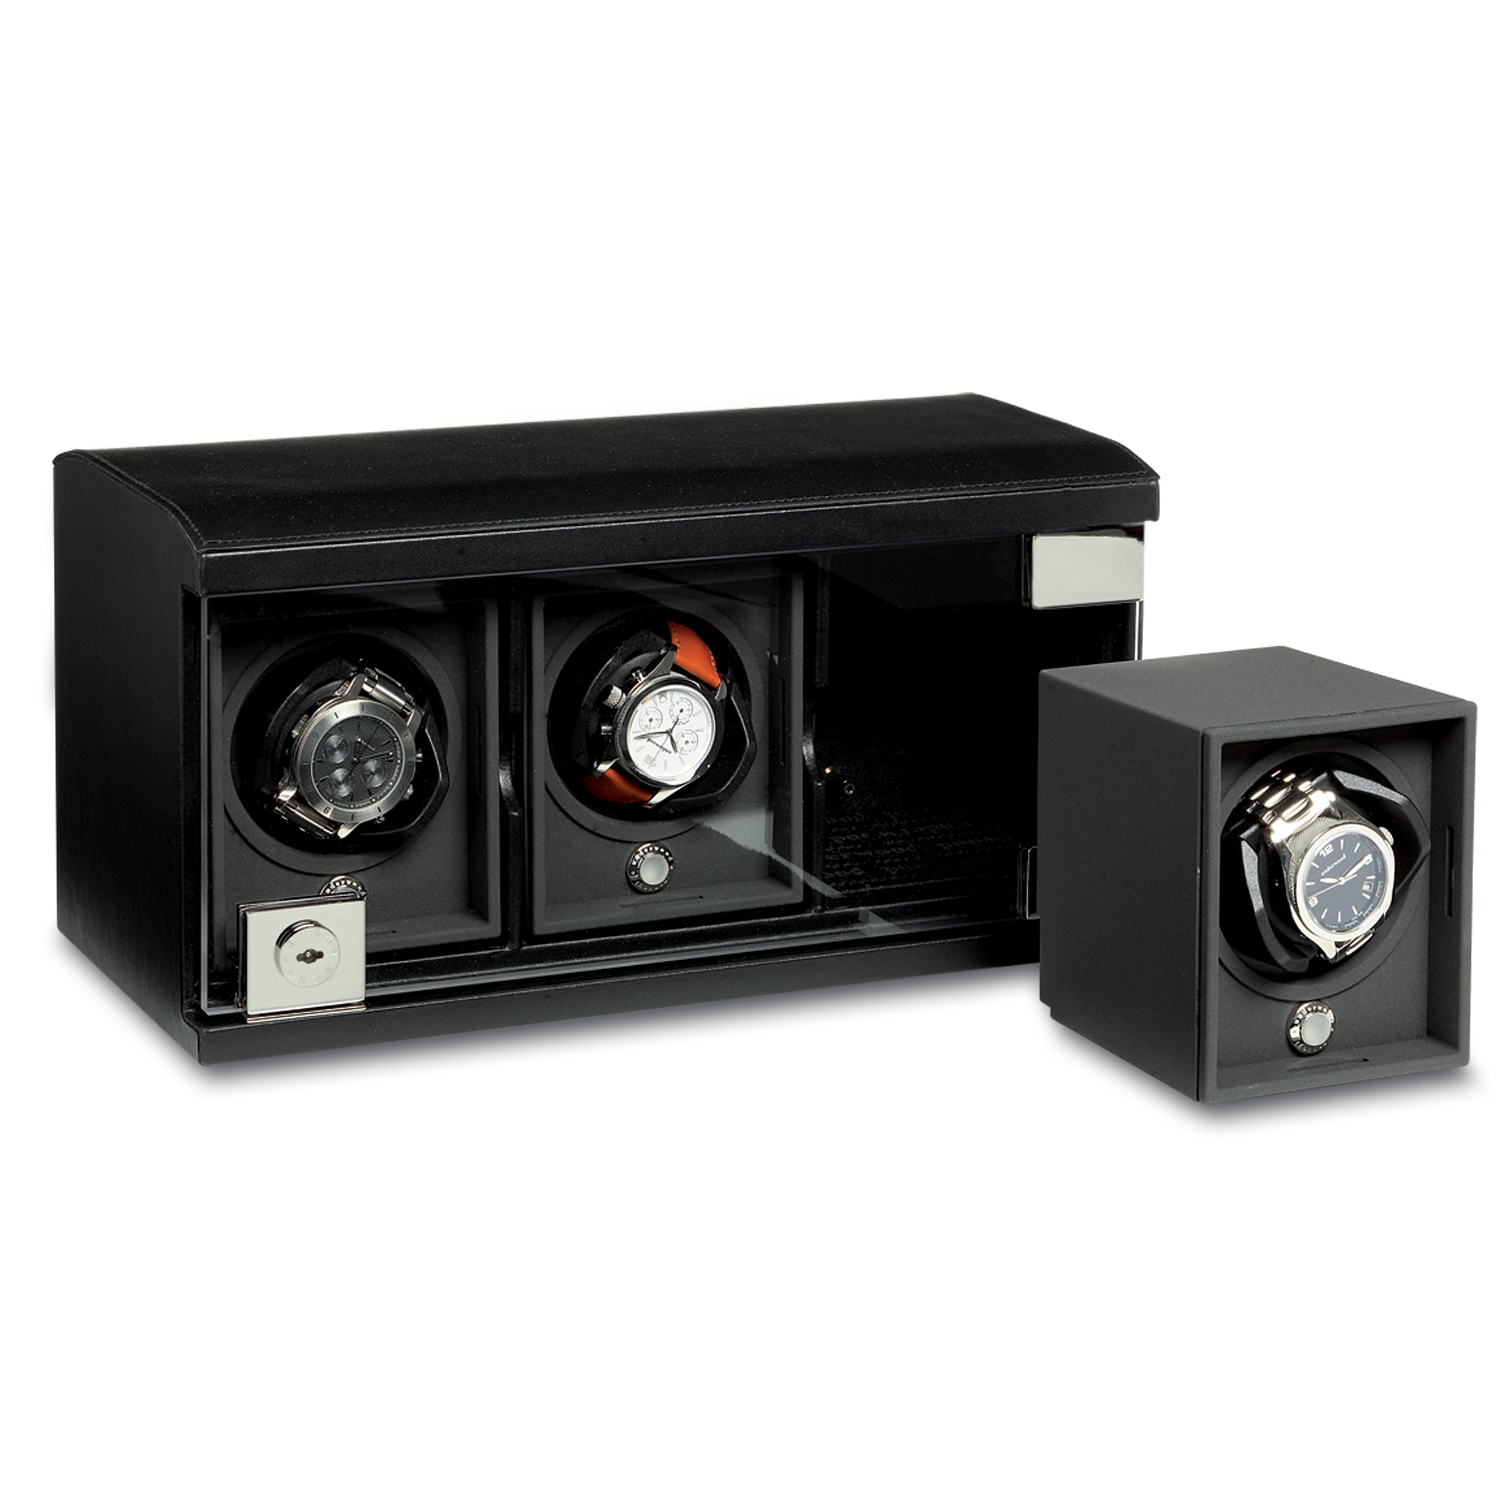 The Triple Watch Winder – A Stylish Way to Wind Your Watches